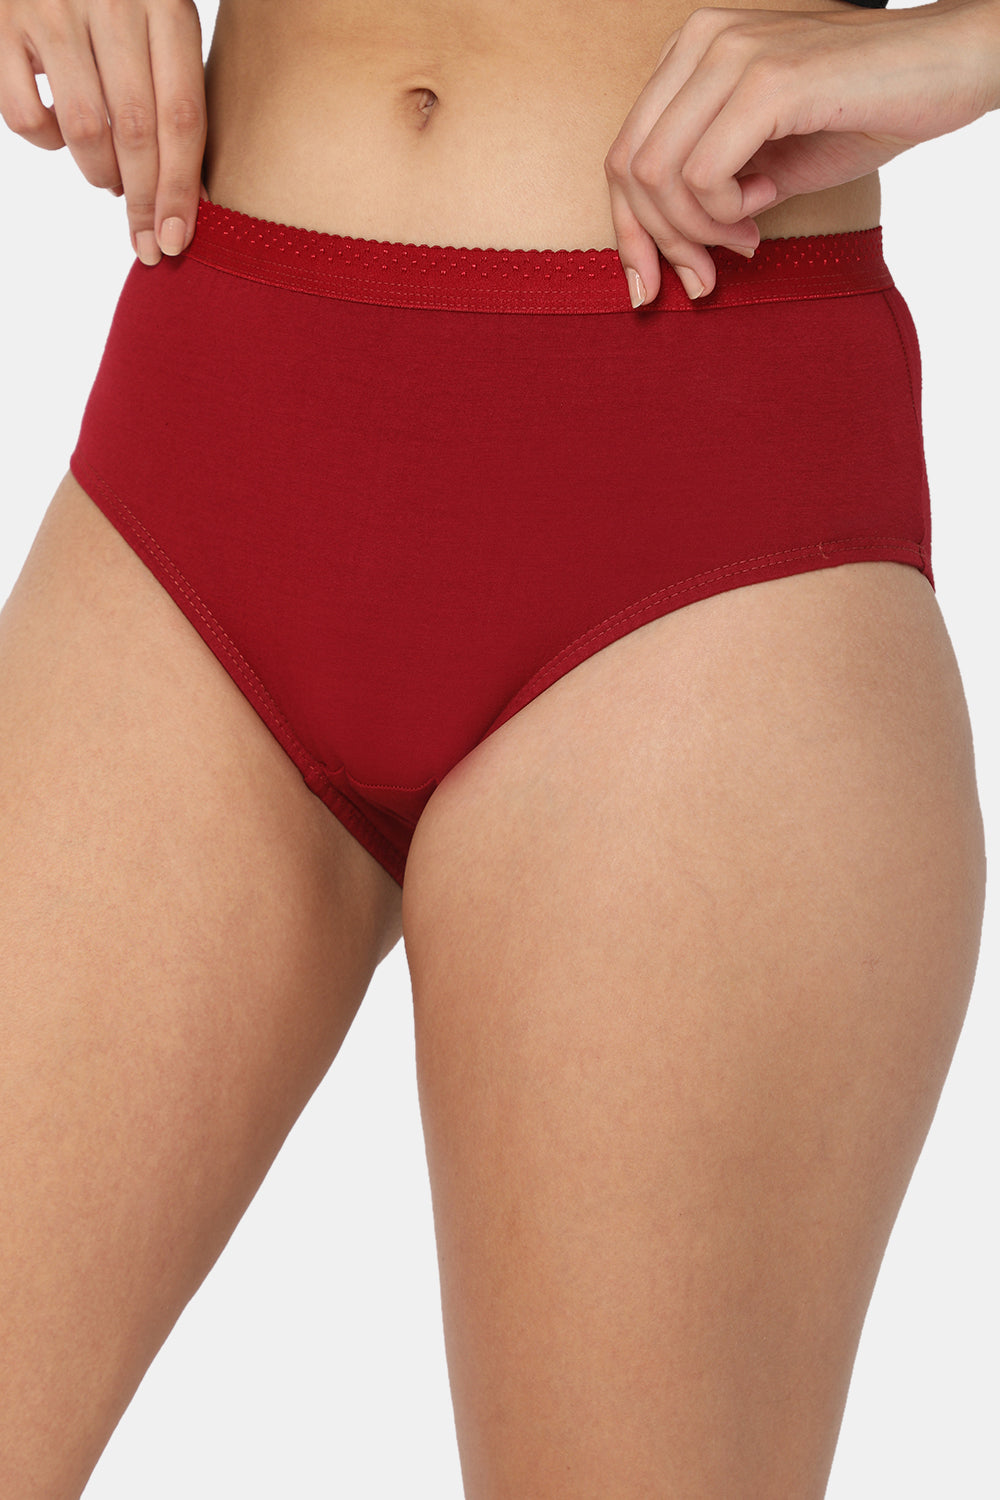 Intimacy Classic Dark Plain Panty - Outer Elastic - Pack of 3